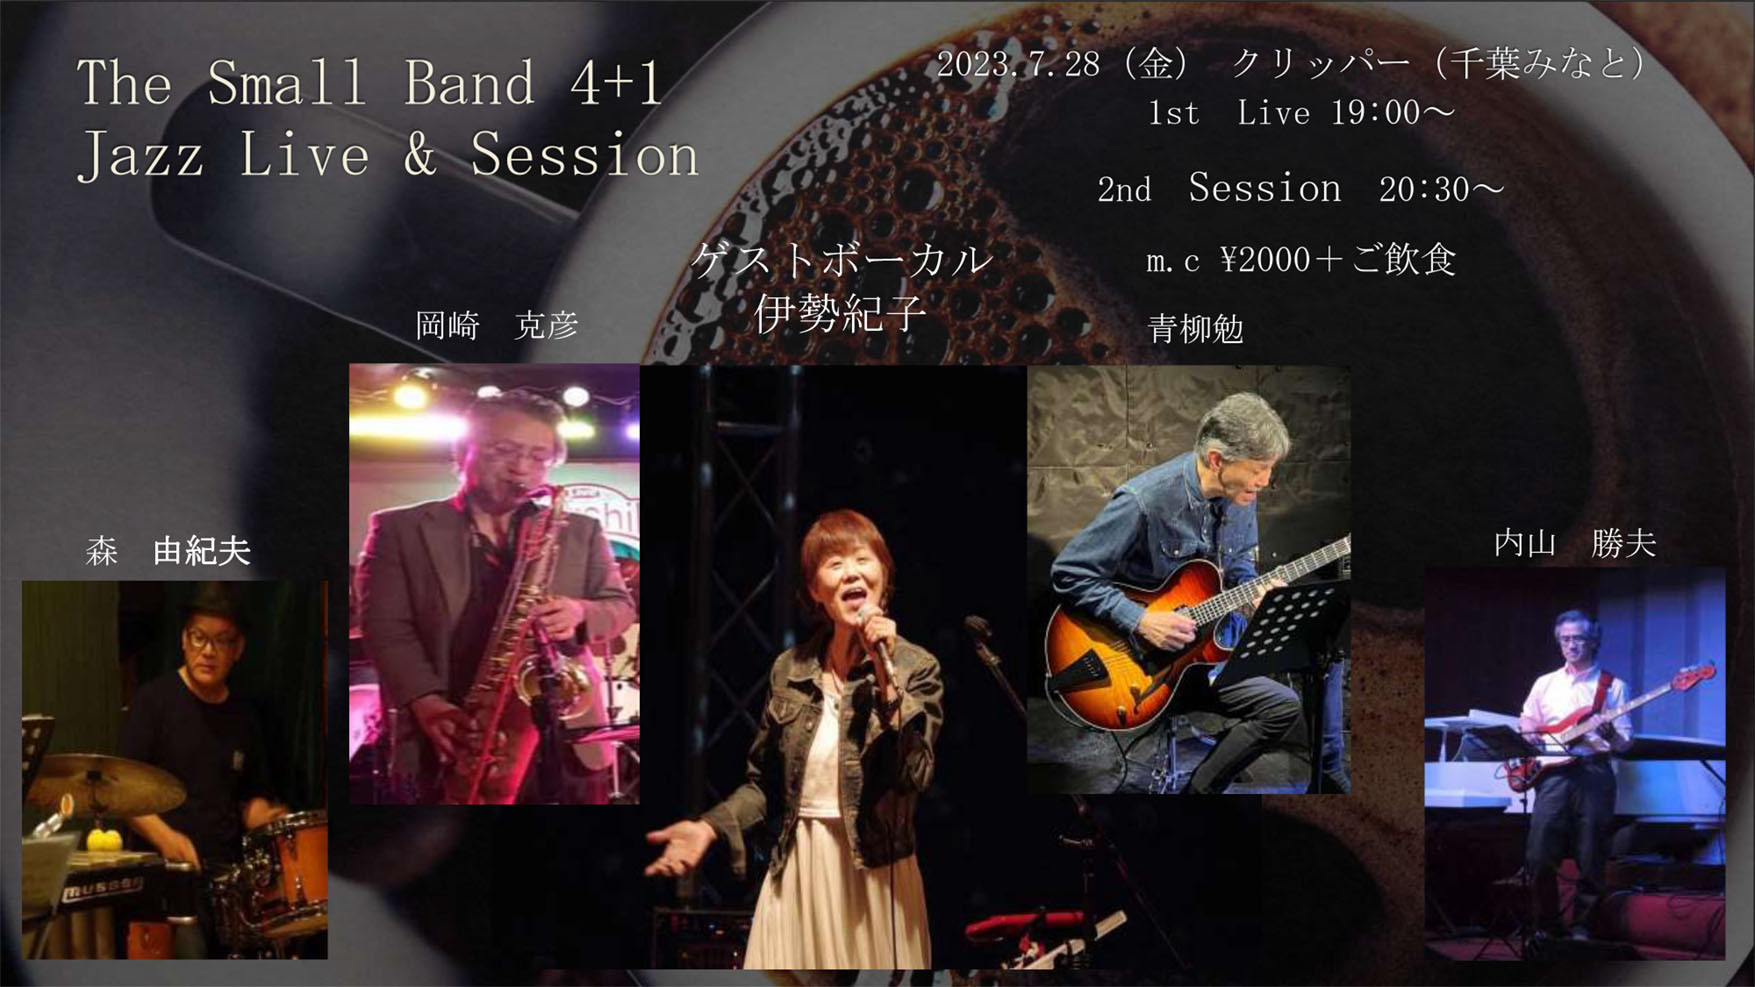 The Small Band 4+1 Jazz Live & Session